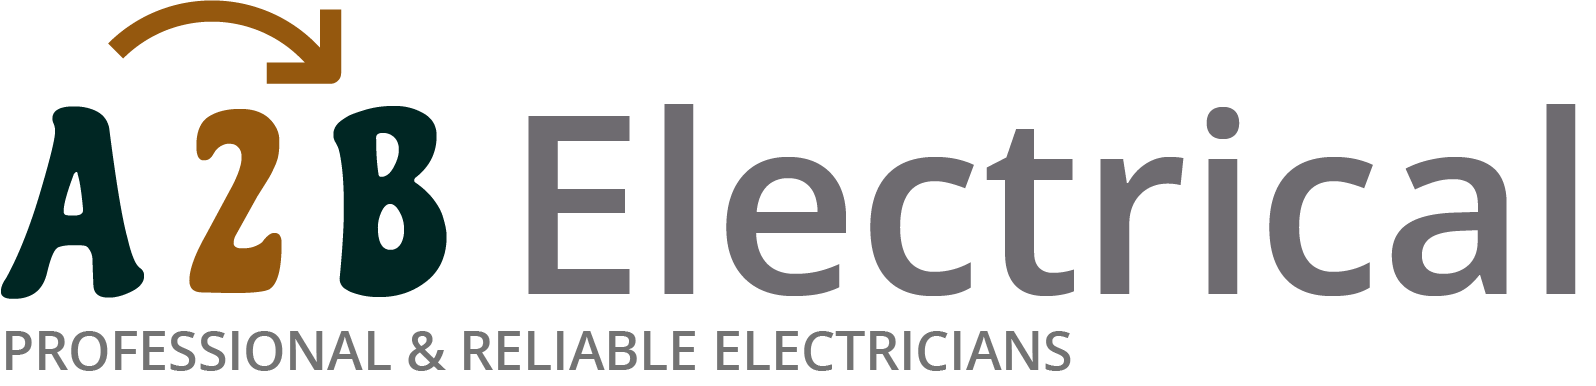 If you have electrical wiring problems in Hoddesdon, we can provide an electrician to have a look for you. 